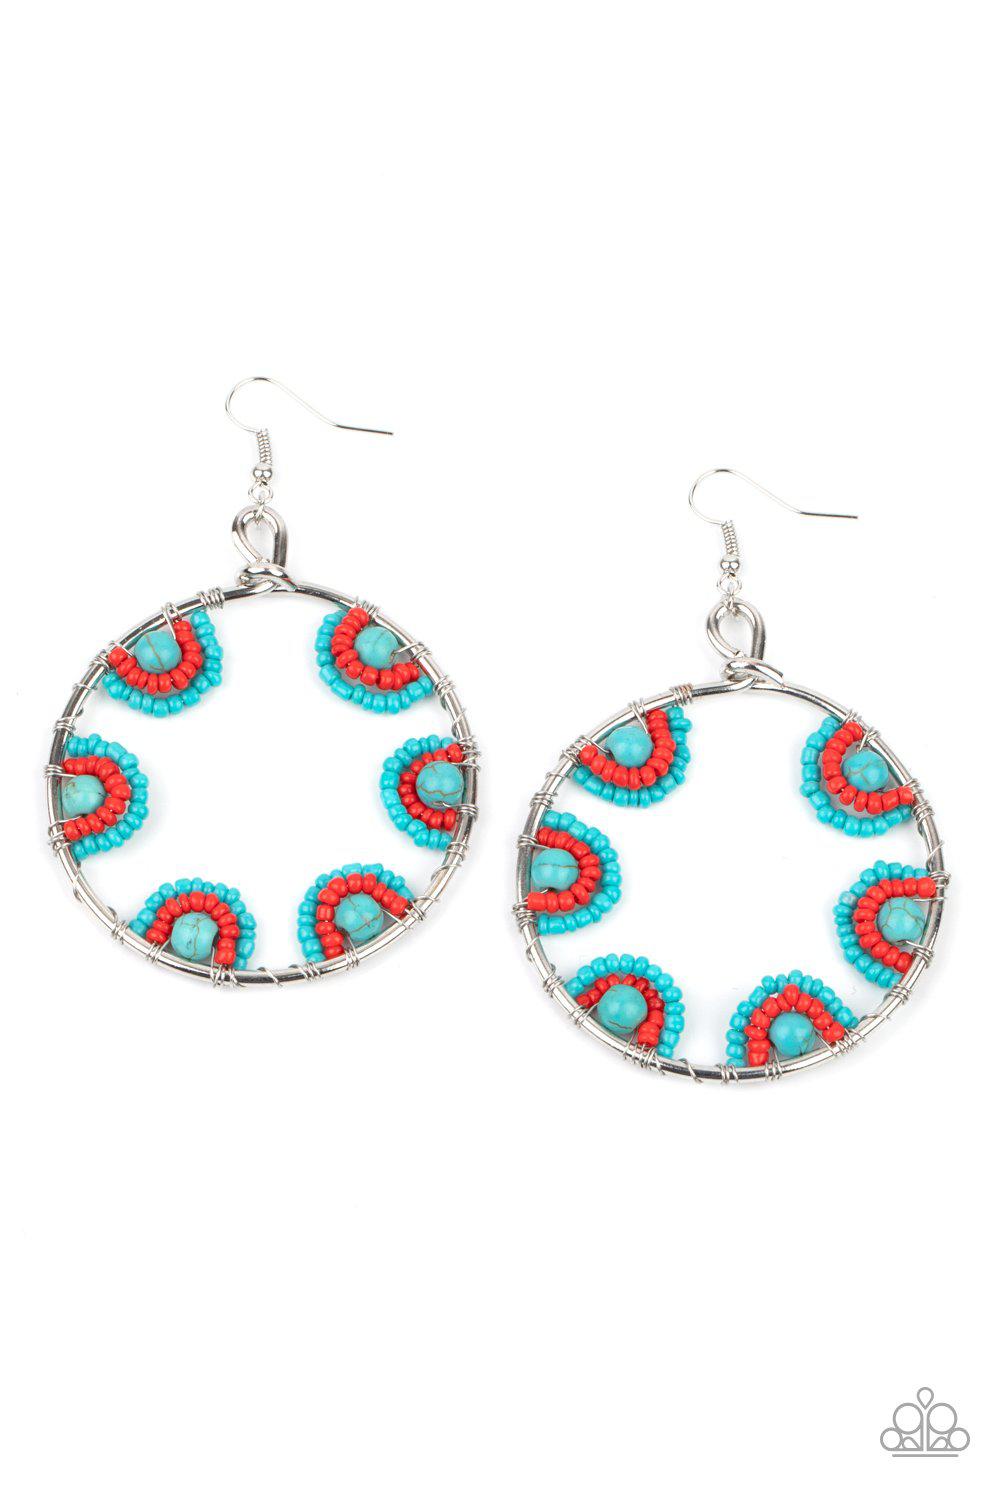 Off The Rim Turquoise Blue and Red Seed Bead and Stone Earrings - Paparazzi Accessories- lightbox - CarasShop.com - $5 Jewelry by Cara Jewels